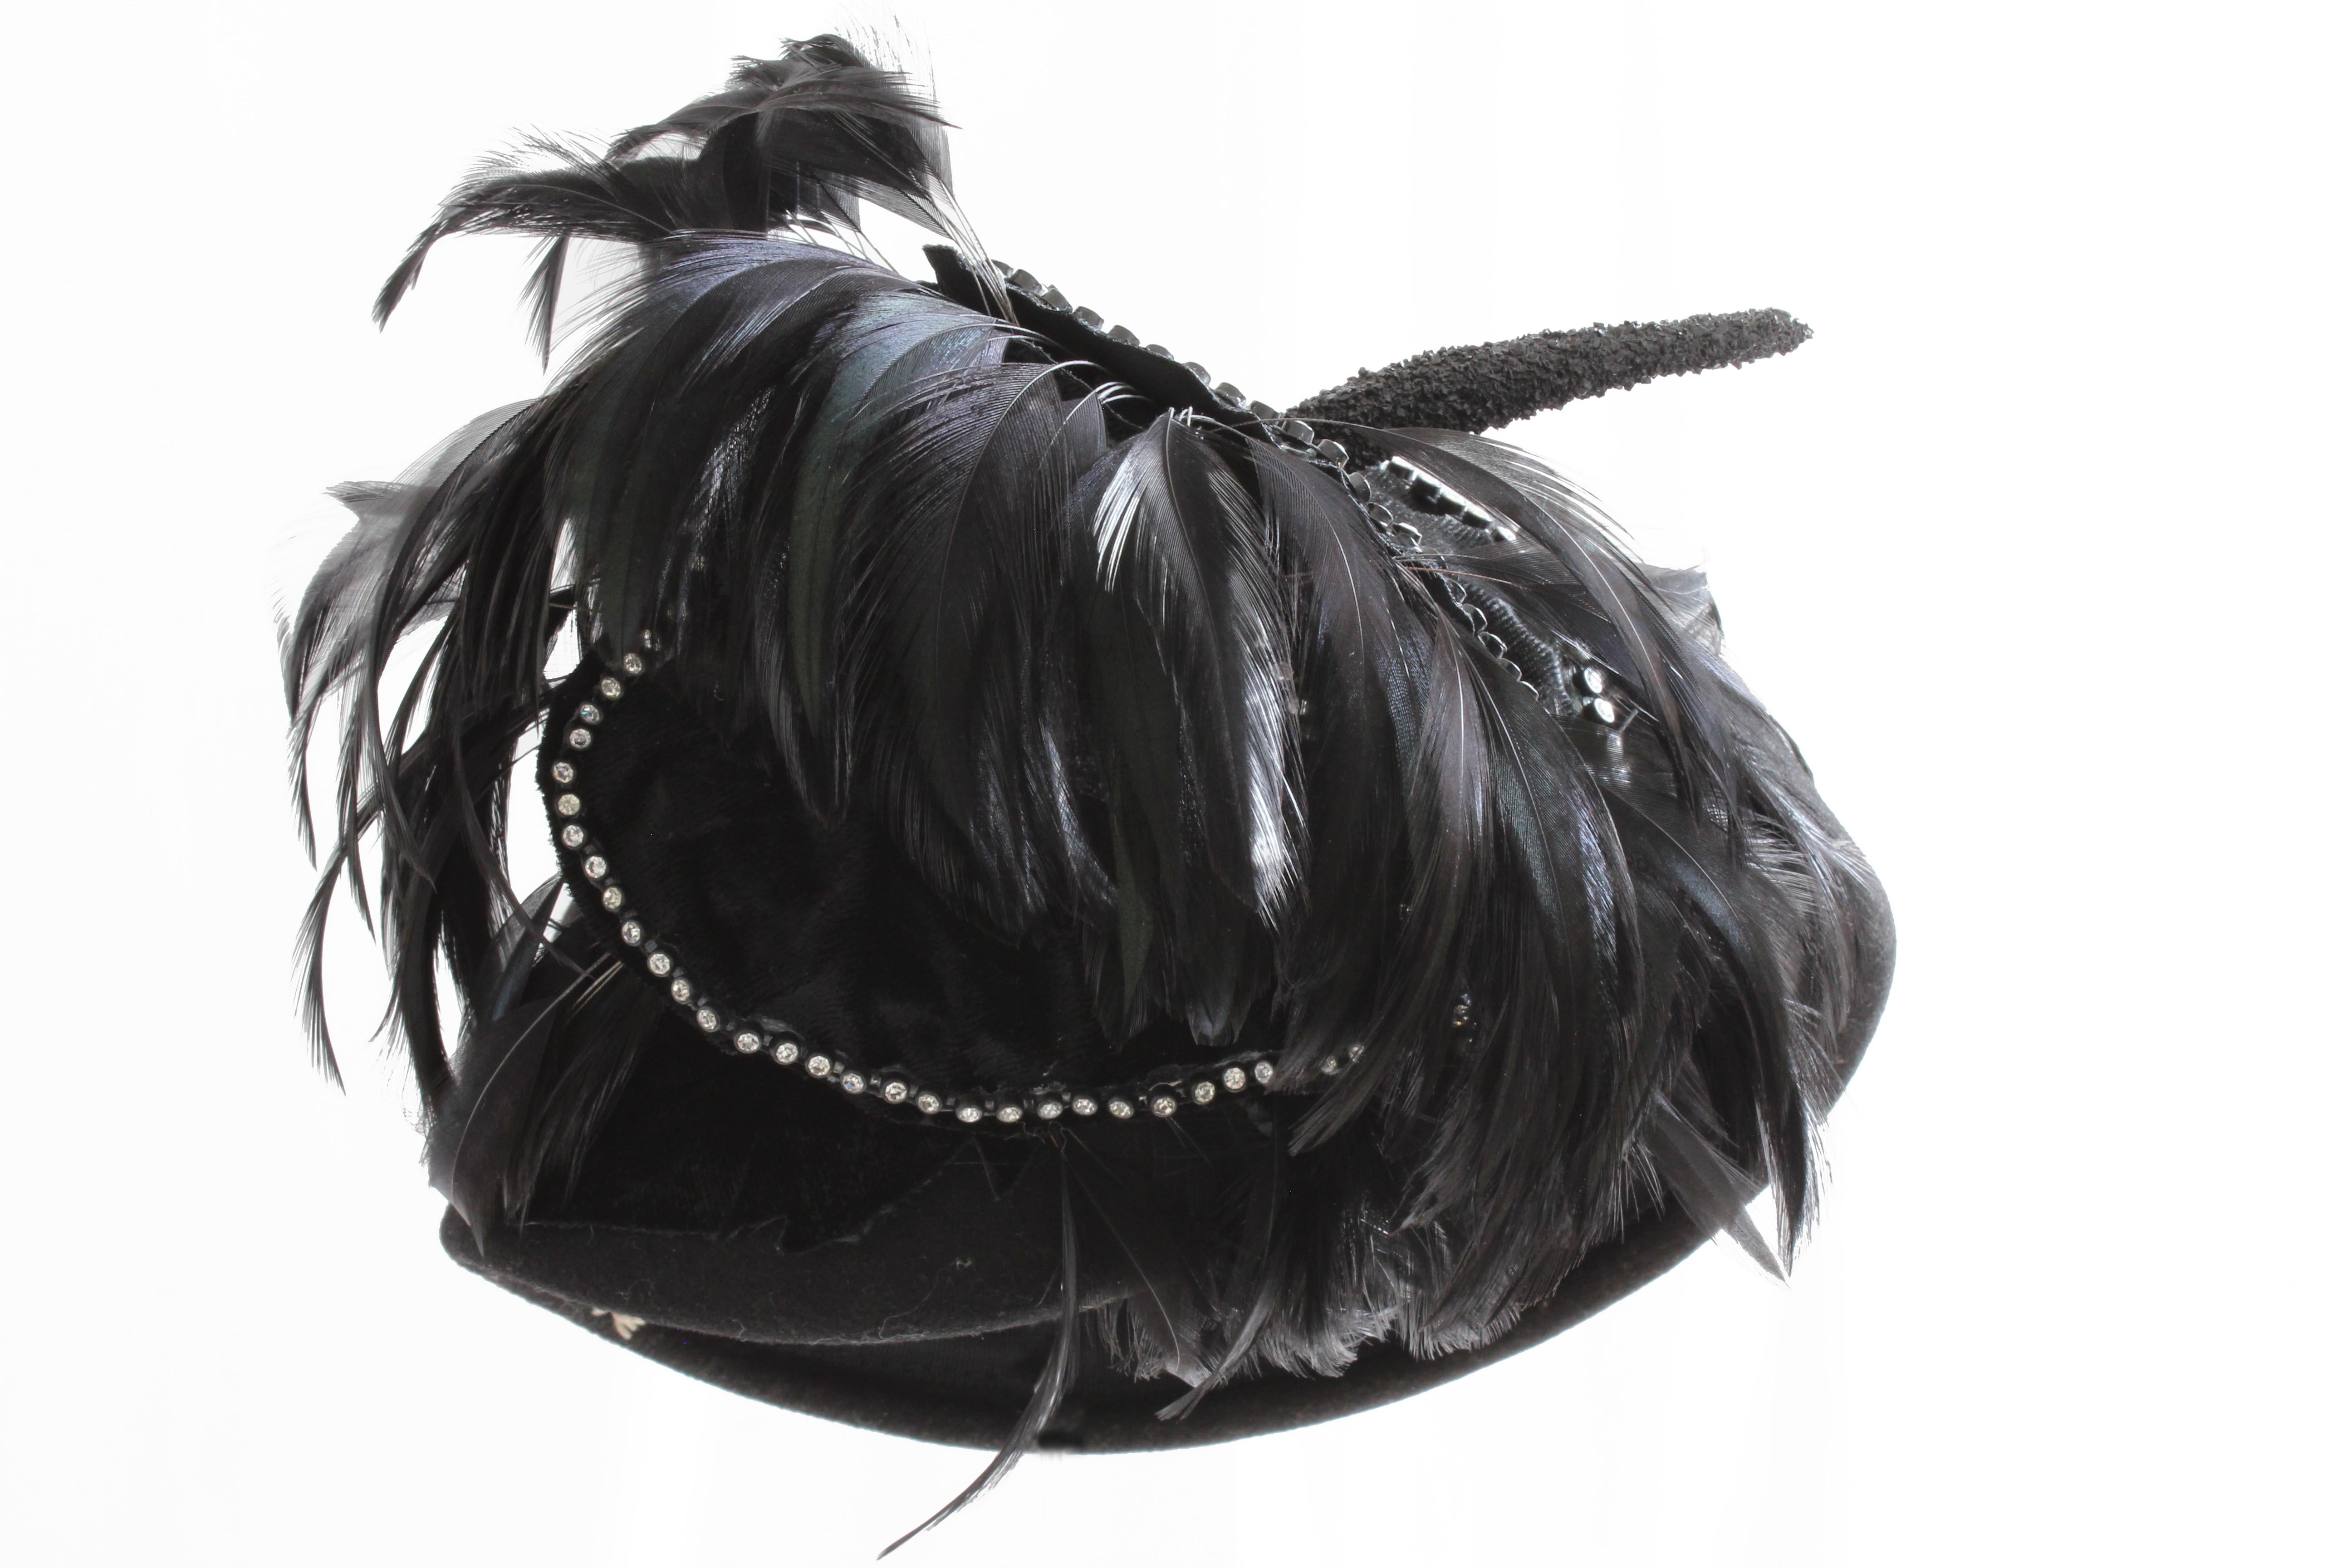 Jack McConnell Boutique Black Wool Clochette Hat with Feathers 1960s Bollman Hat For Sale 2